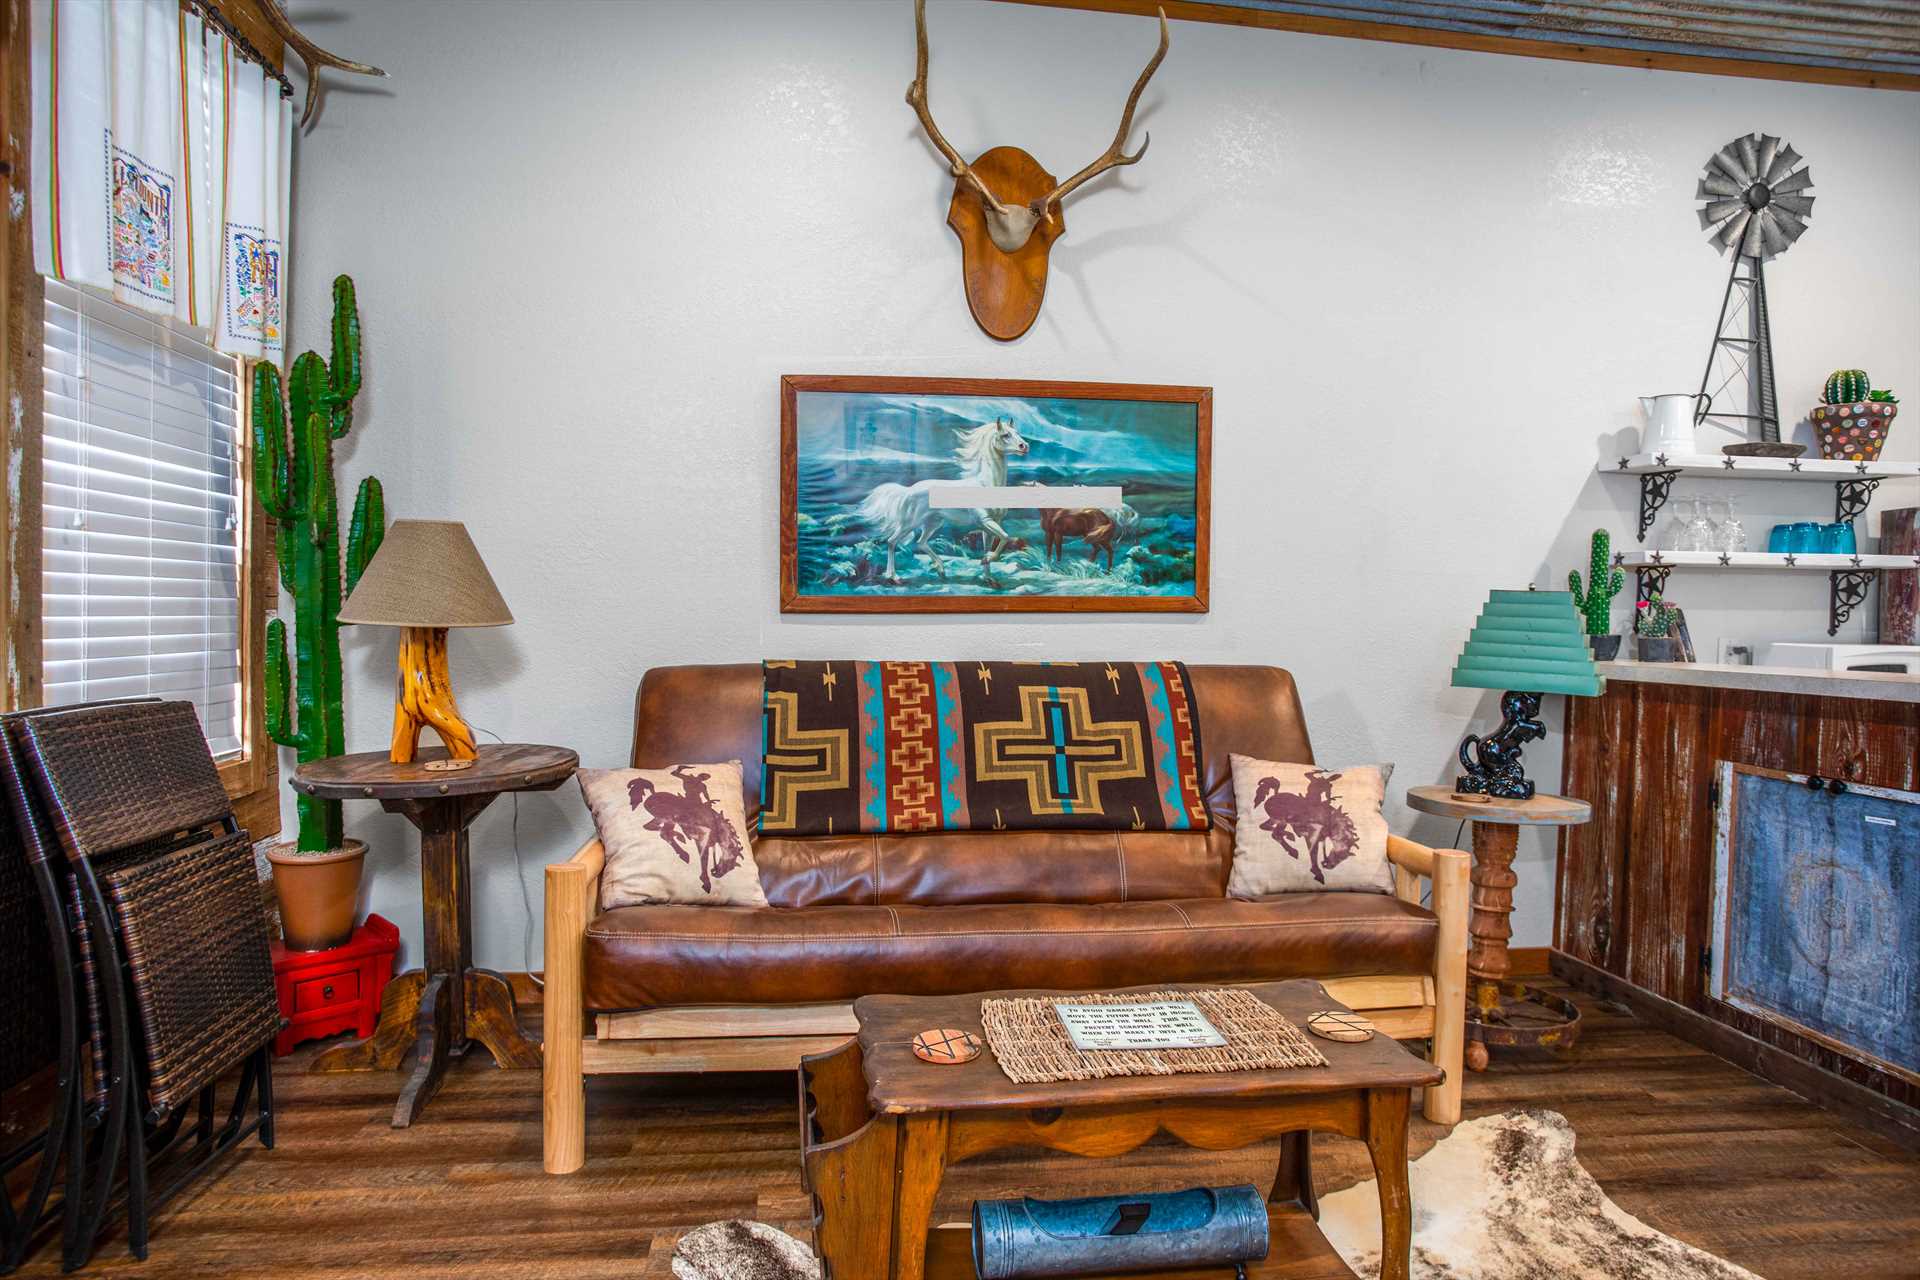                                                 Decorative touches light up Lonesome Dove with southwestern flair, all in a cozy and climate-controlled space!